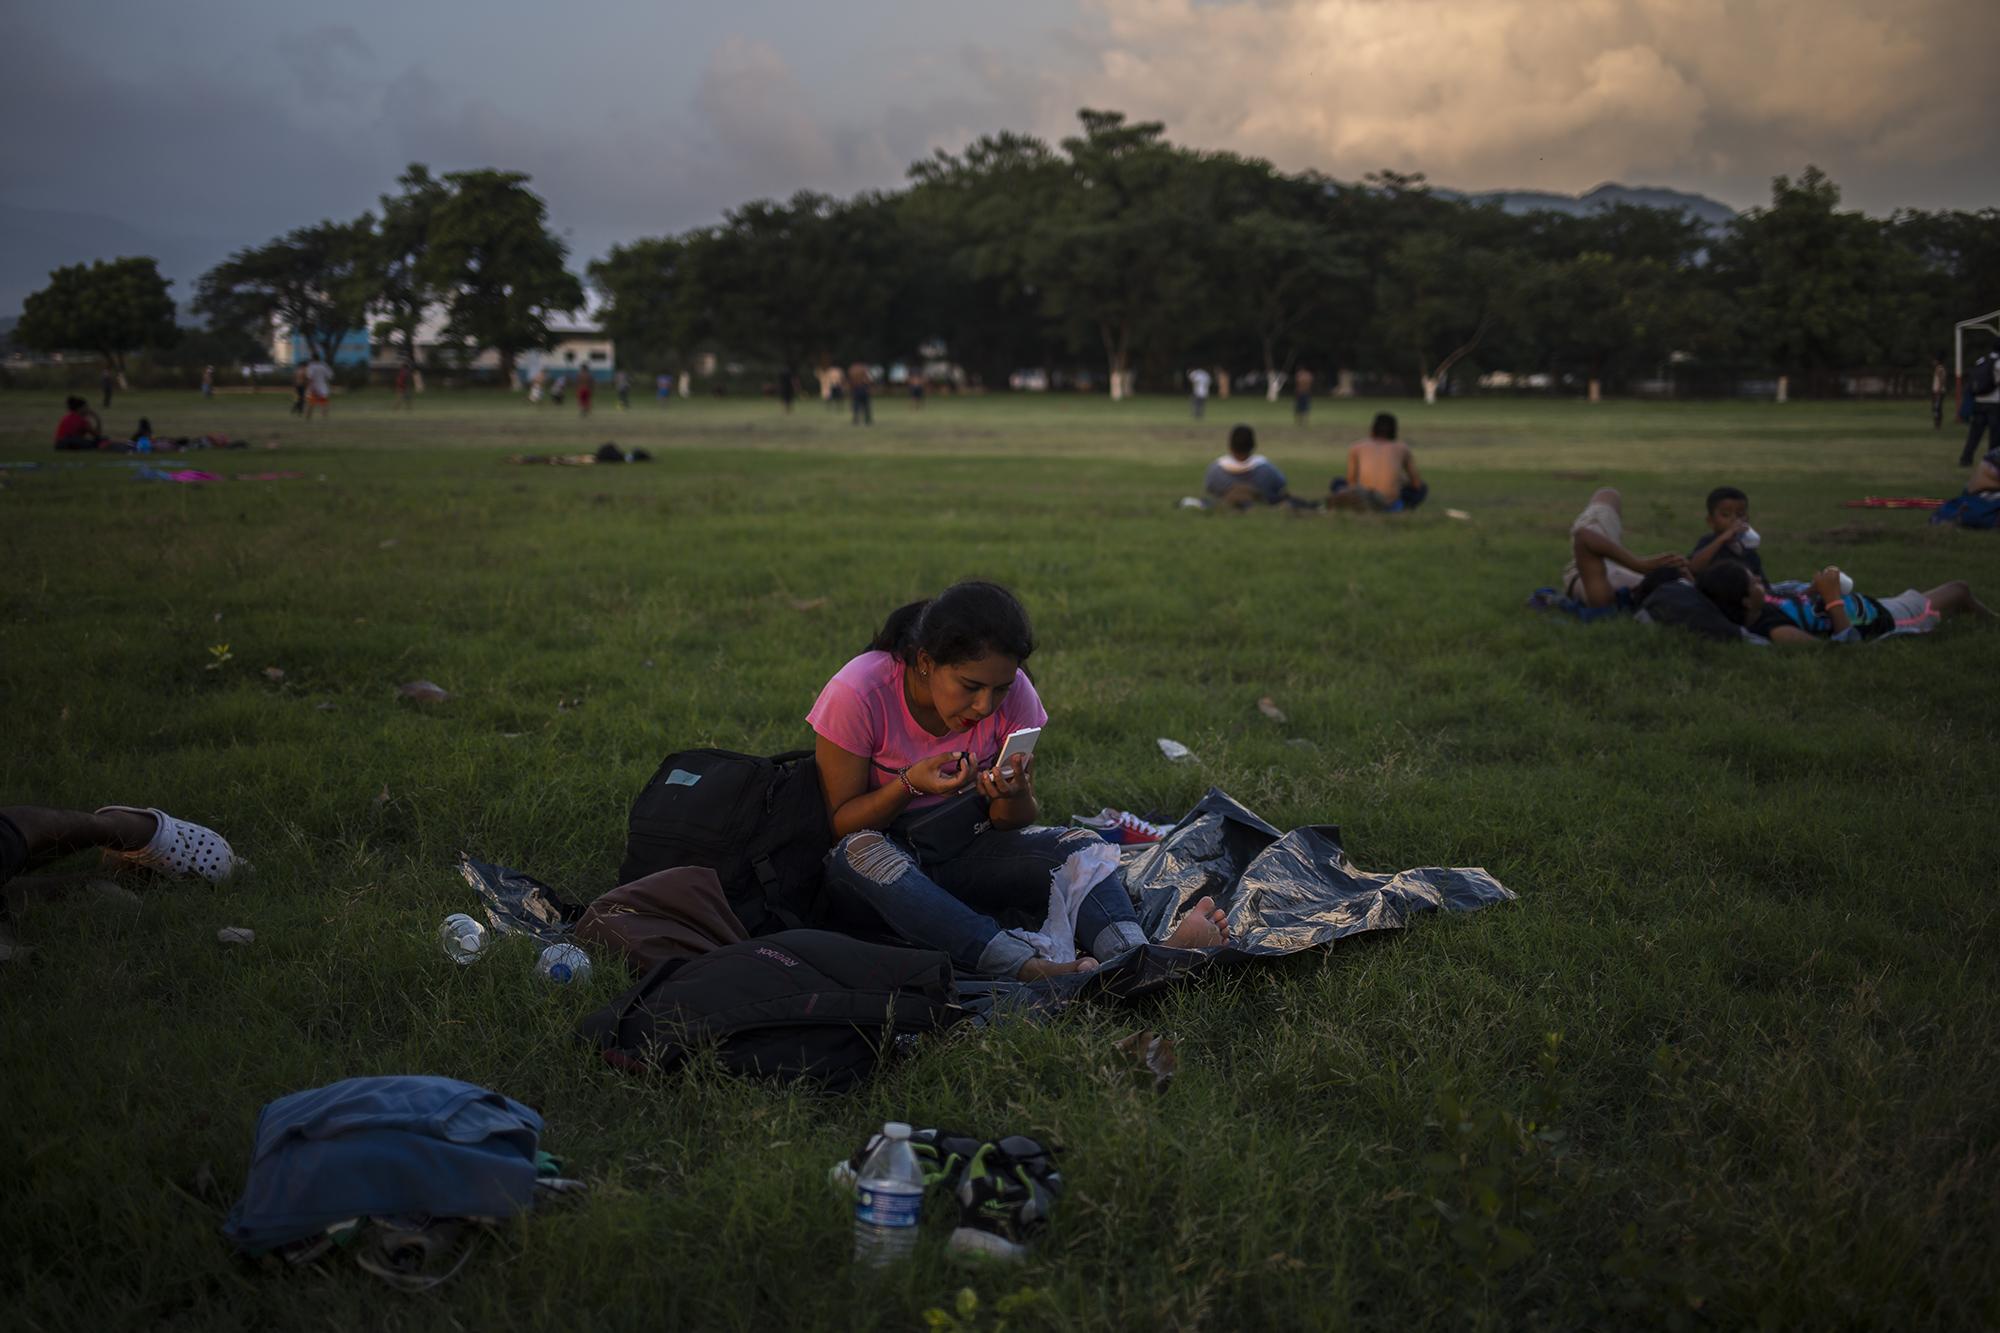 Glenda del Cid is 21 years old. She left San Miguel, El Salvador, on October 30, 2018 to join one of the many caravans that were forming at the time. She left because there were no jobs. On November 8, her group took a ten-hour layover at a soccer field in the sports complex in Arriaga, Chiapas, Mexico, which the authorities had turned into a temporary shelter. The next day, at four o